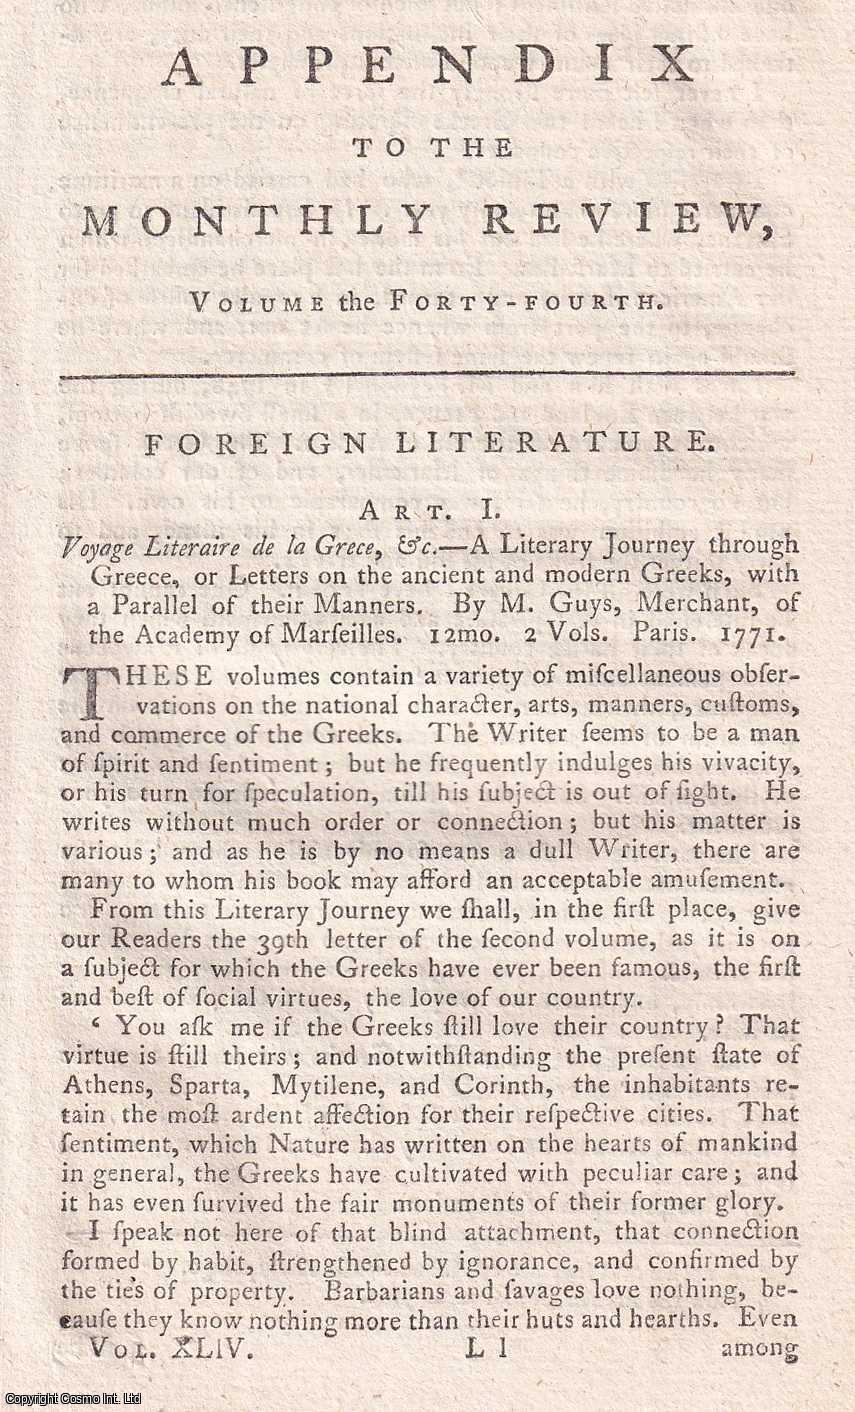 Author Not Stated - A Literary Journey through Greece, or Letters on The Ancient and Modern Greeks, with a Parallel of their Manners. By M. Guys, Merchant, of the Academy of Marseilles. An original article from the Monthly Review, 1771.